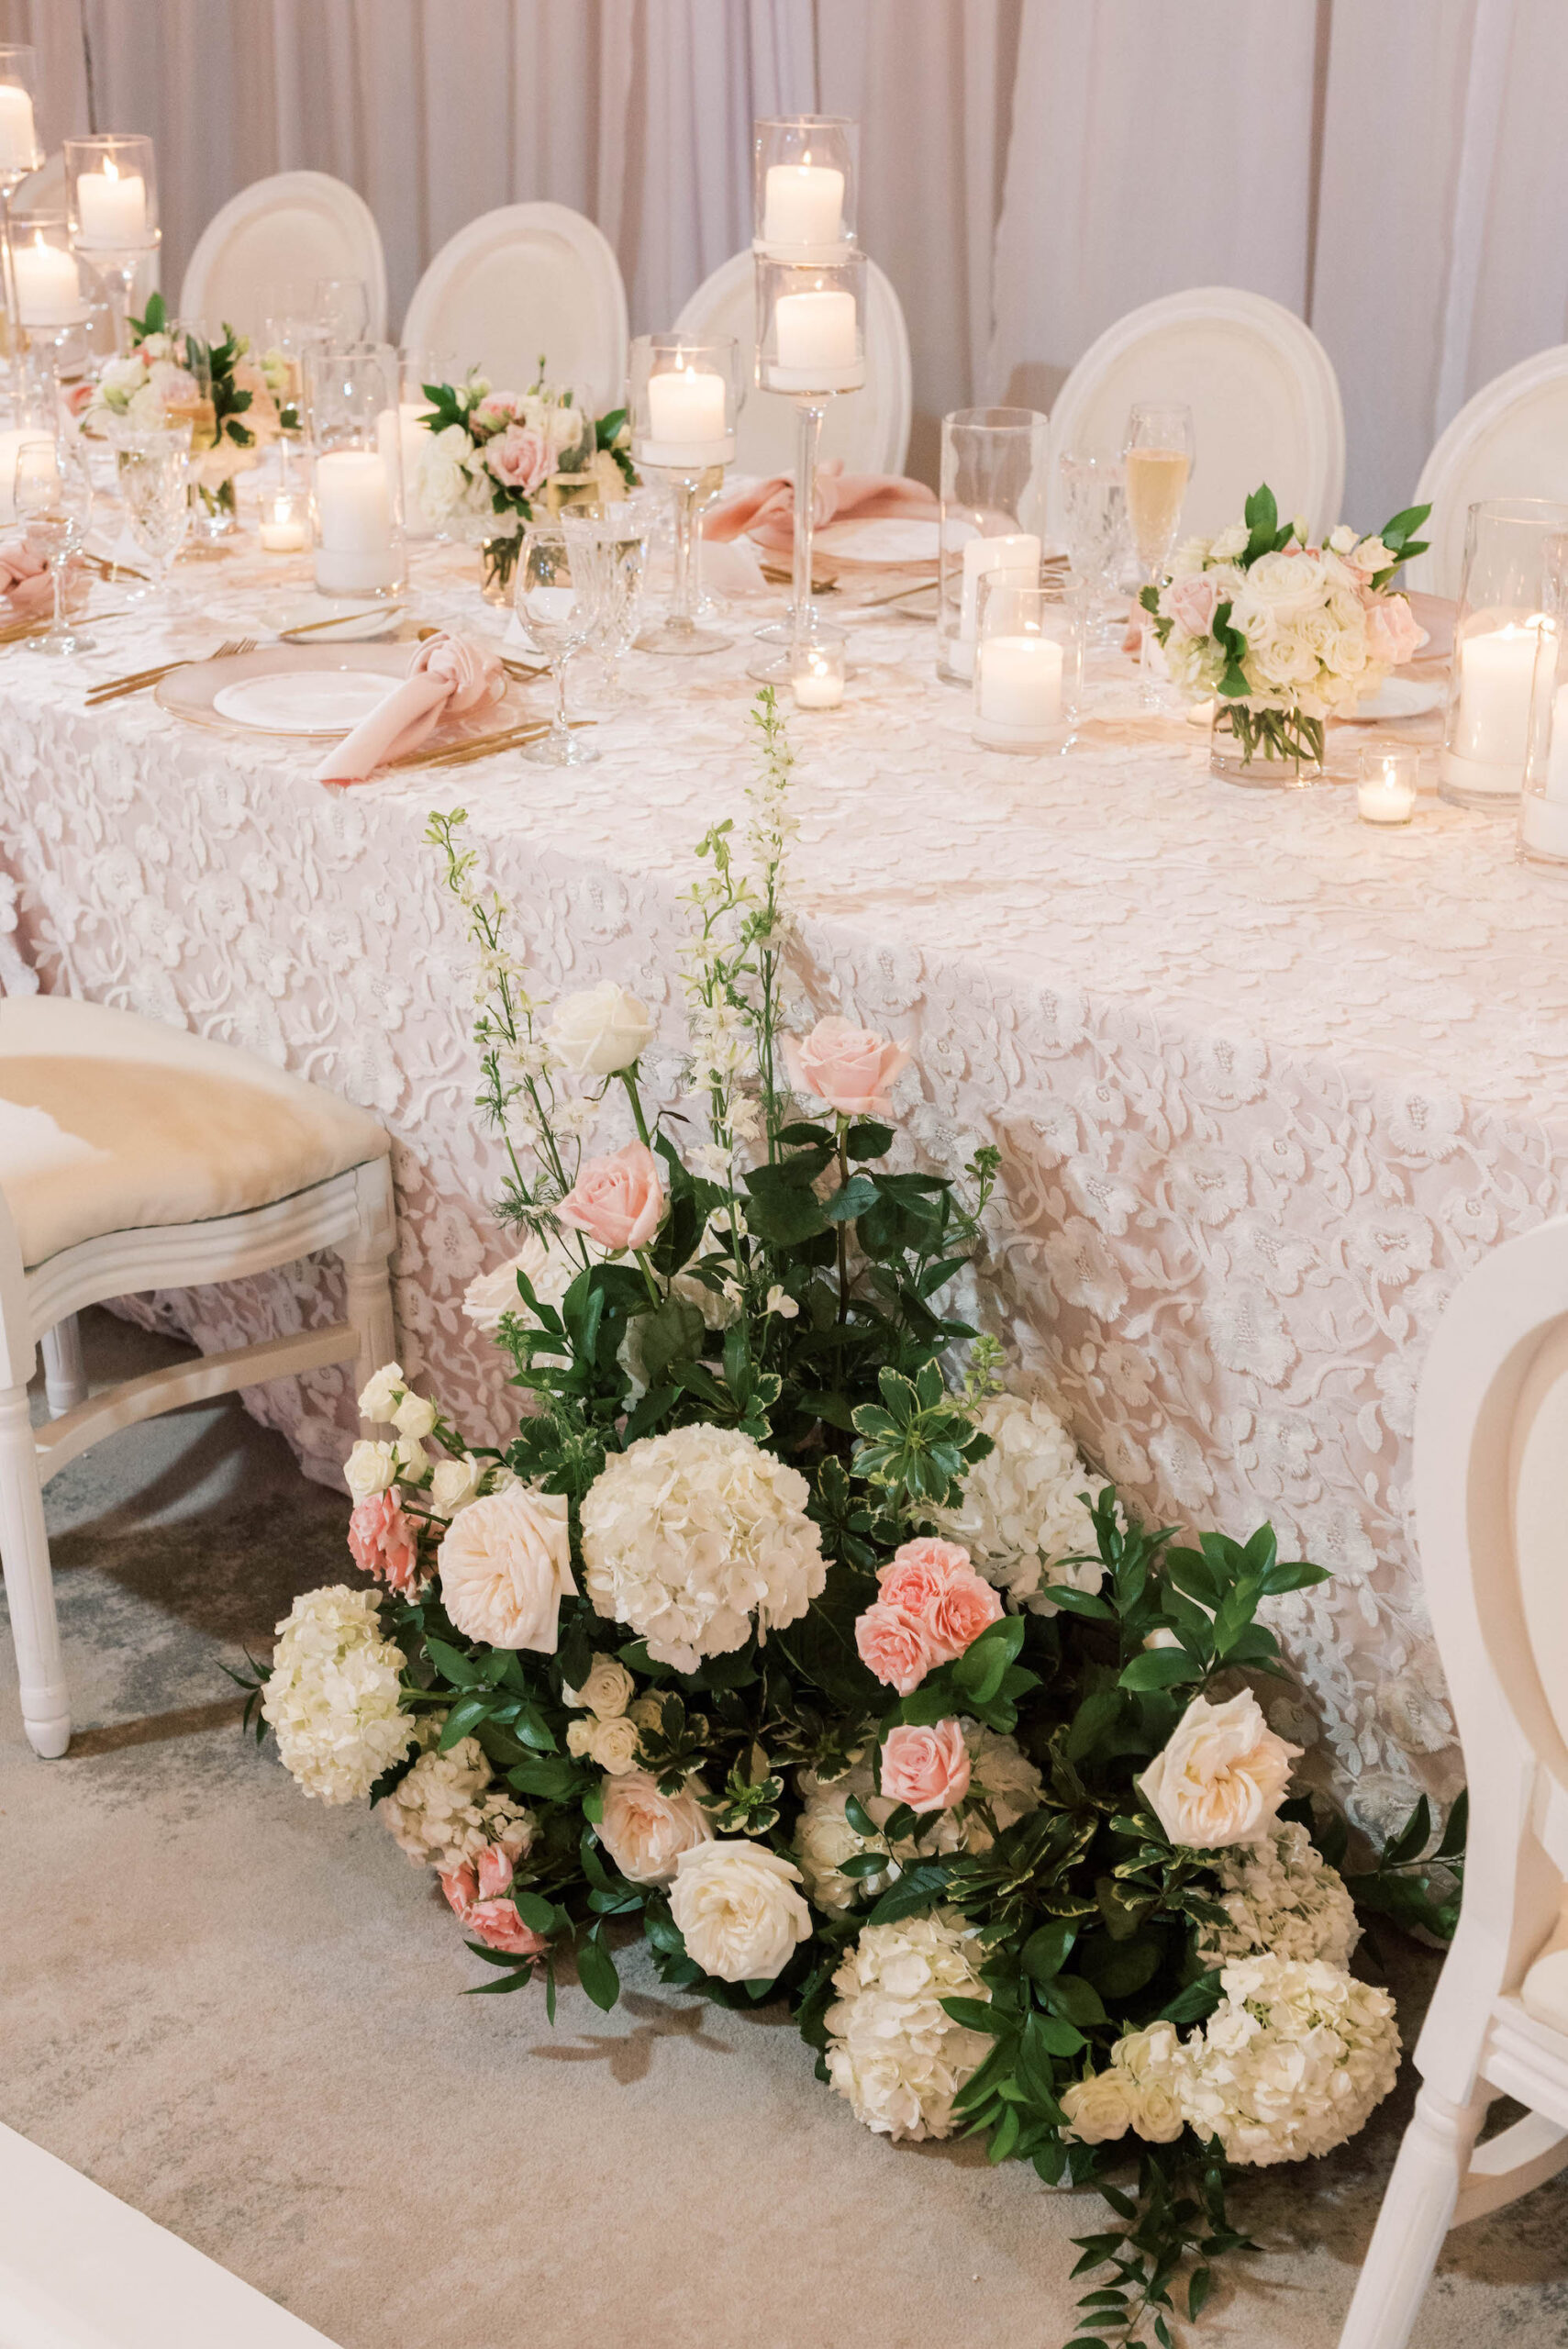 Pink and White Old Florida Black Tie Wedding Reception Feasting Table Ideas | Tampa Bay Planner Parties A' La Carte